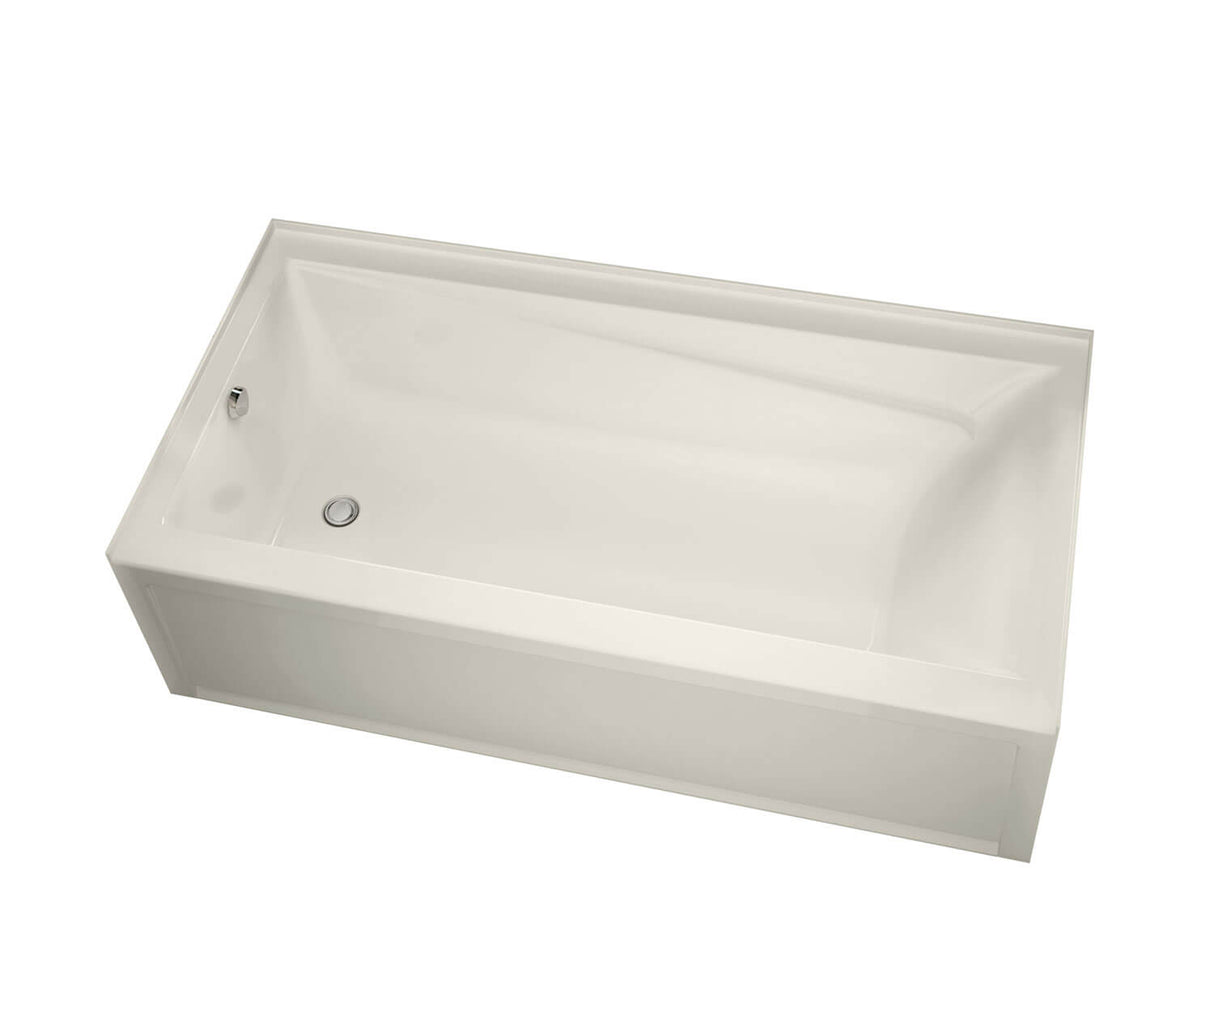 MAAX 106172-000-007-101 Exhibit 6036 IFS Acrylic Alcove Right-Hand Drain Bathtub in Biscuit